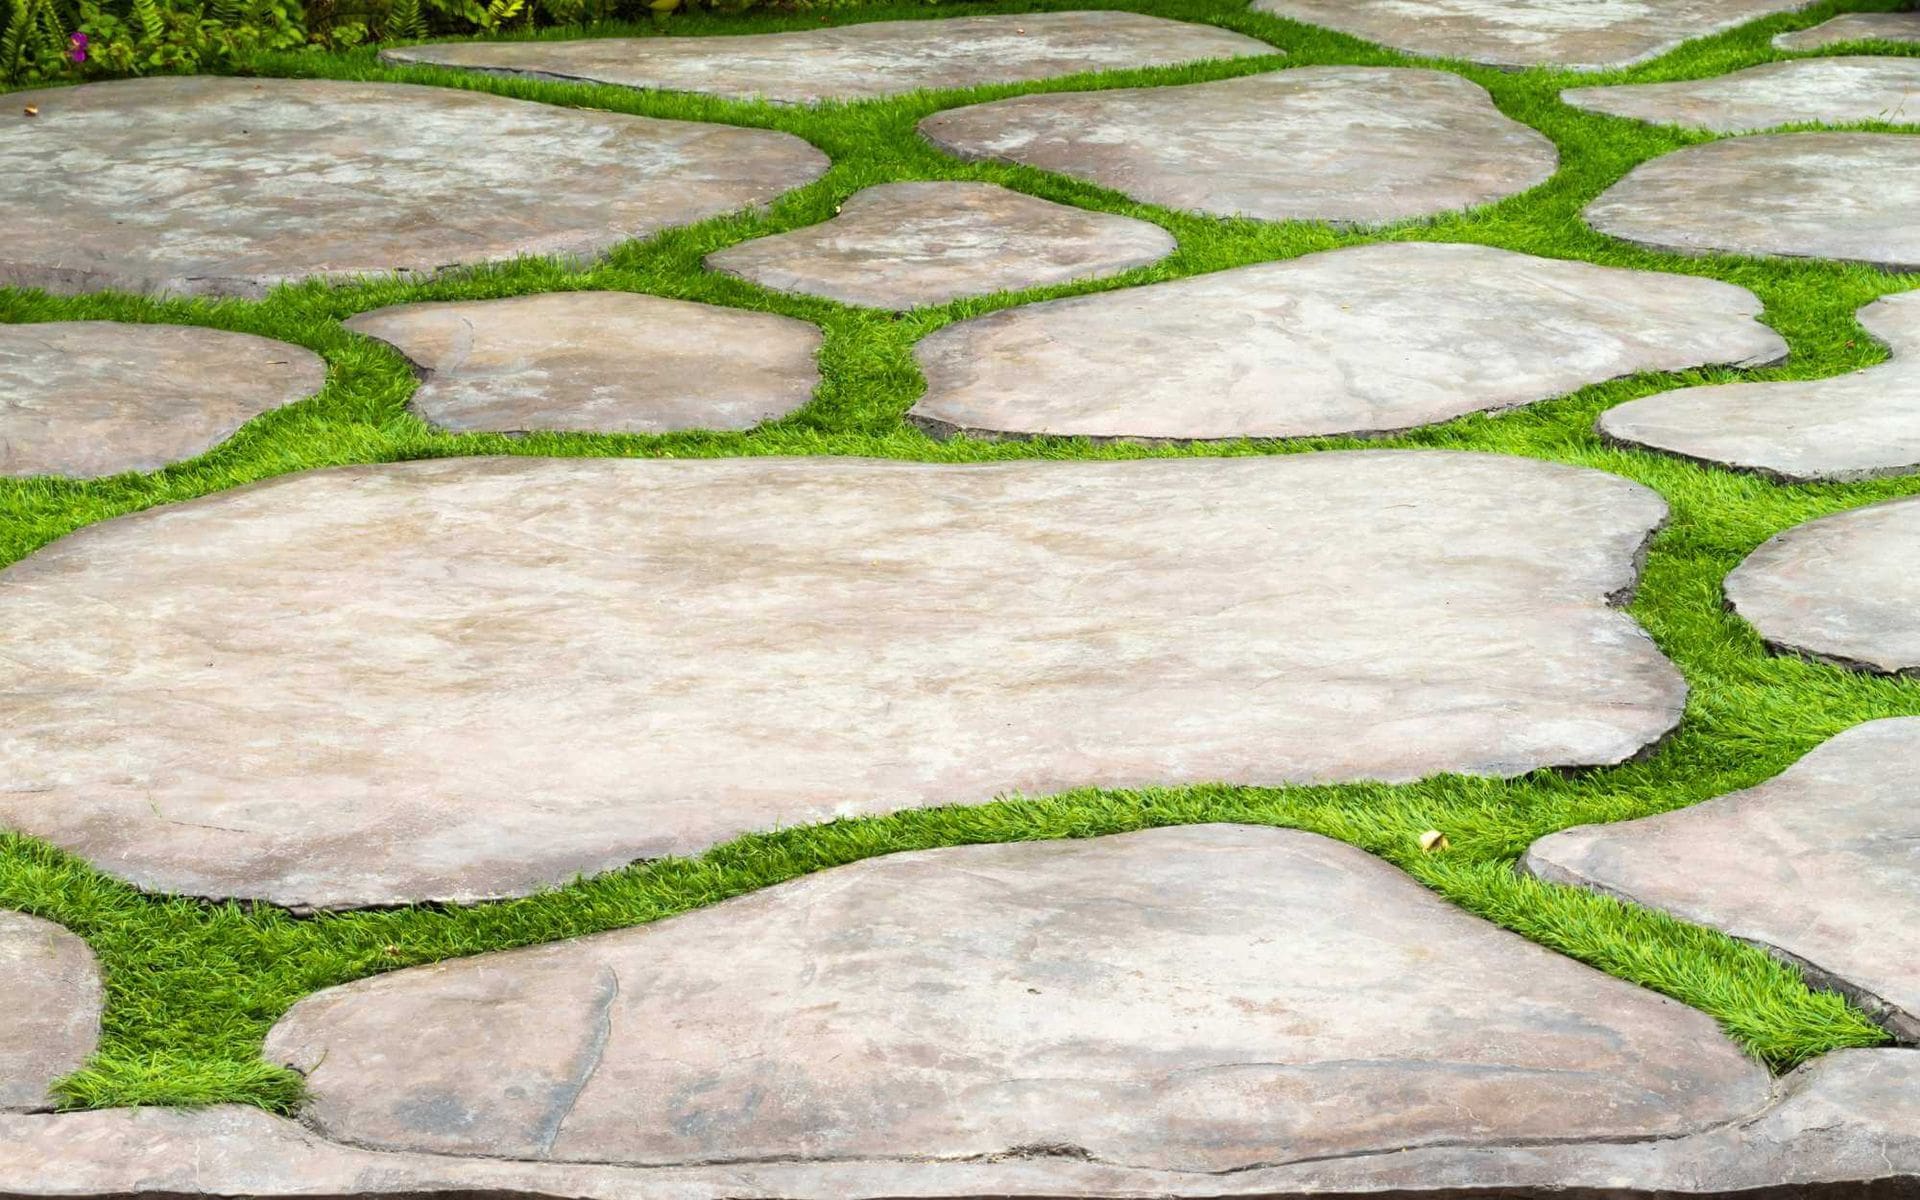 A garden walkway in Sun City features large, irregularly shaped stone slabs interspersed with vibrant green grass, creating a natural and organic pattern. The stones vary in size and shape, with grass filling the gaps between them. For similar designs, consider West Valley Concrete services for expert craftsmanship.